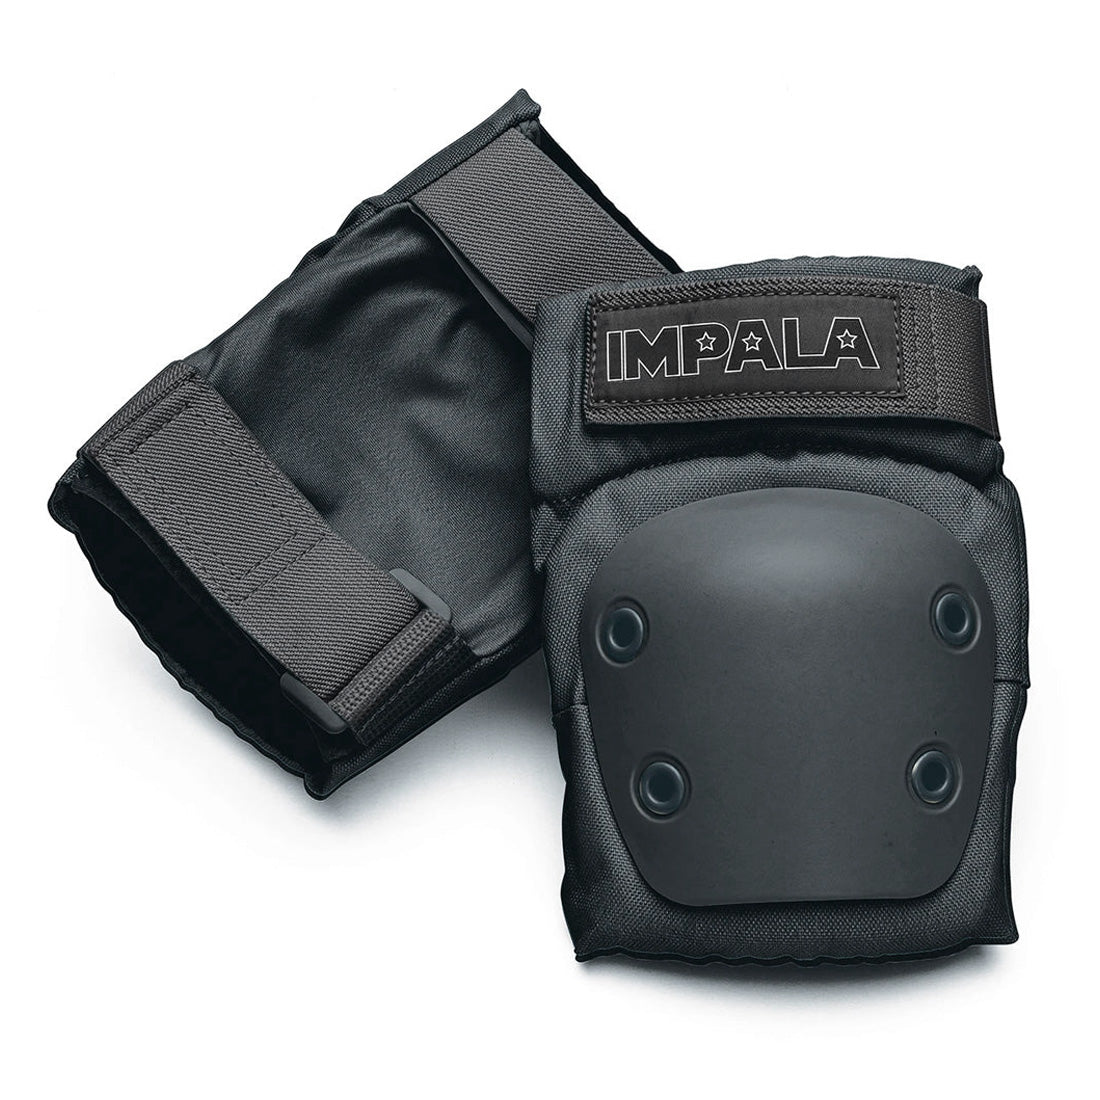 Impala Tri Pack Black - Adult Protective Gear